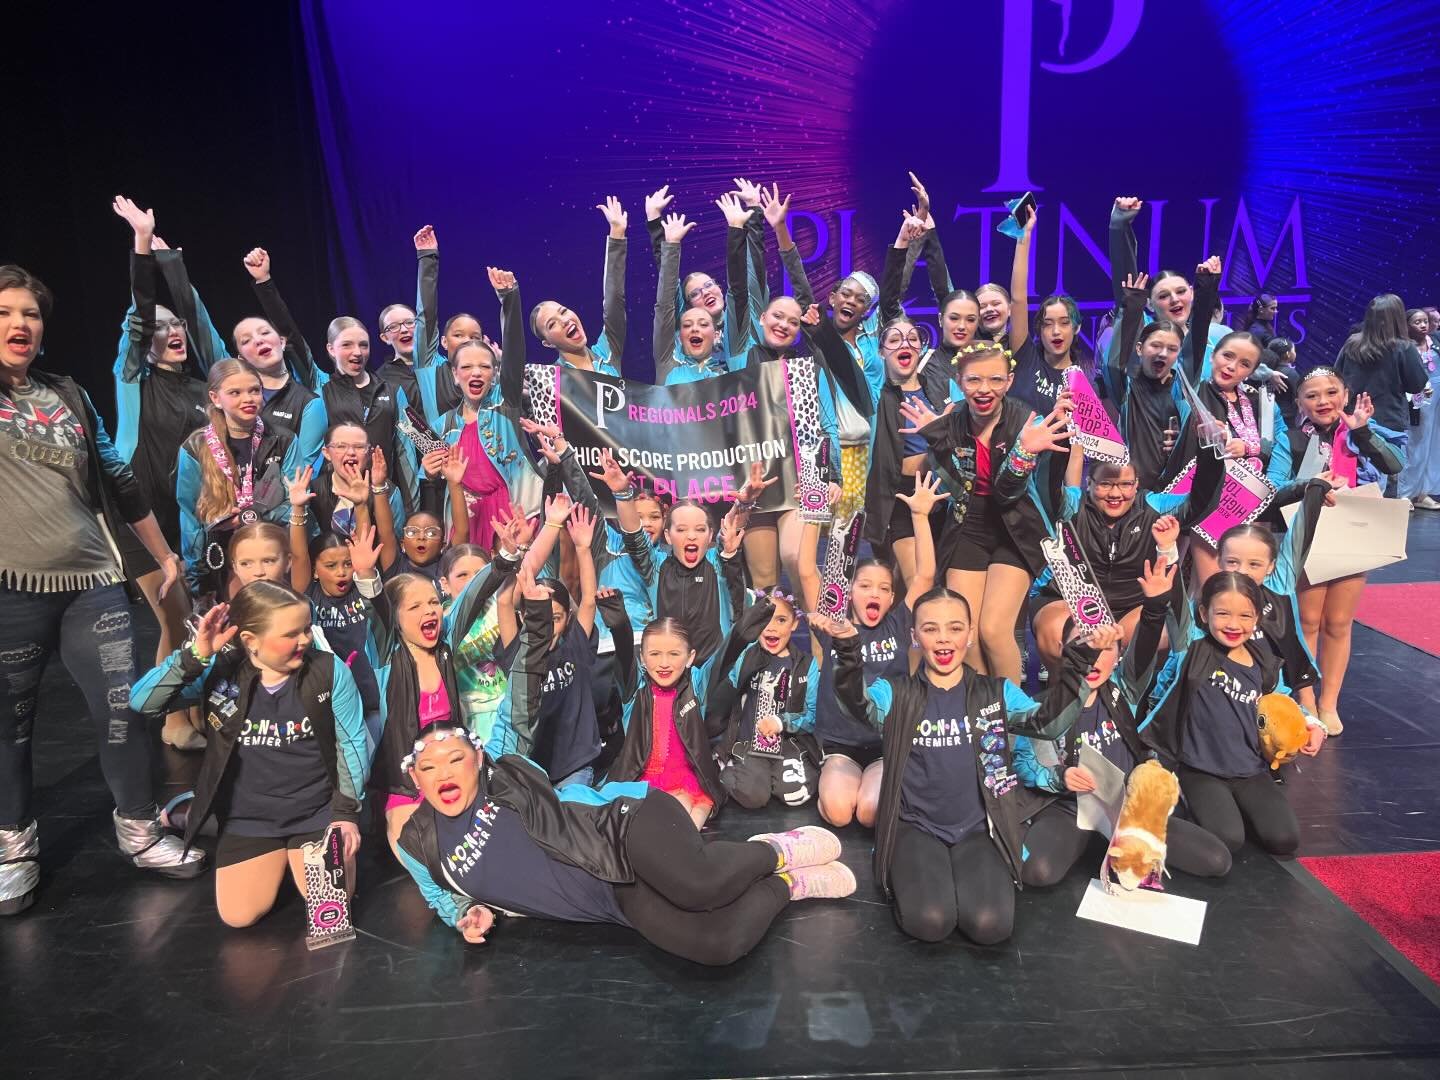 What an incredible weekend in Little Rock, AR for @p3talentcomp! We walked away with the studio achievement award, showing not only excellent quality routines and technique, but excellent showmanship on and off the stage, as well as kindness to other